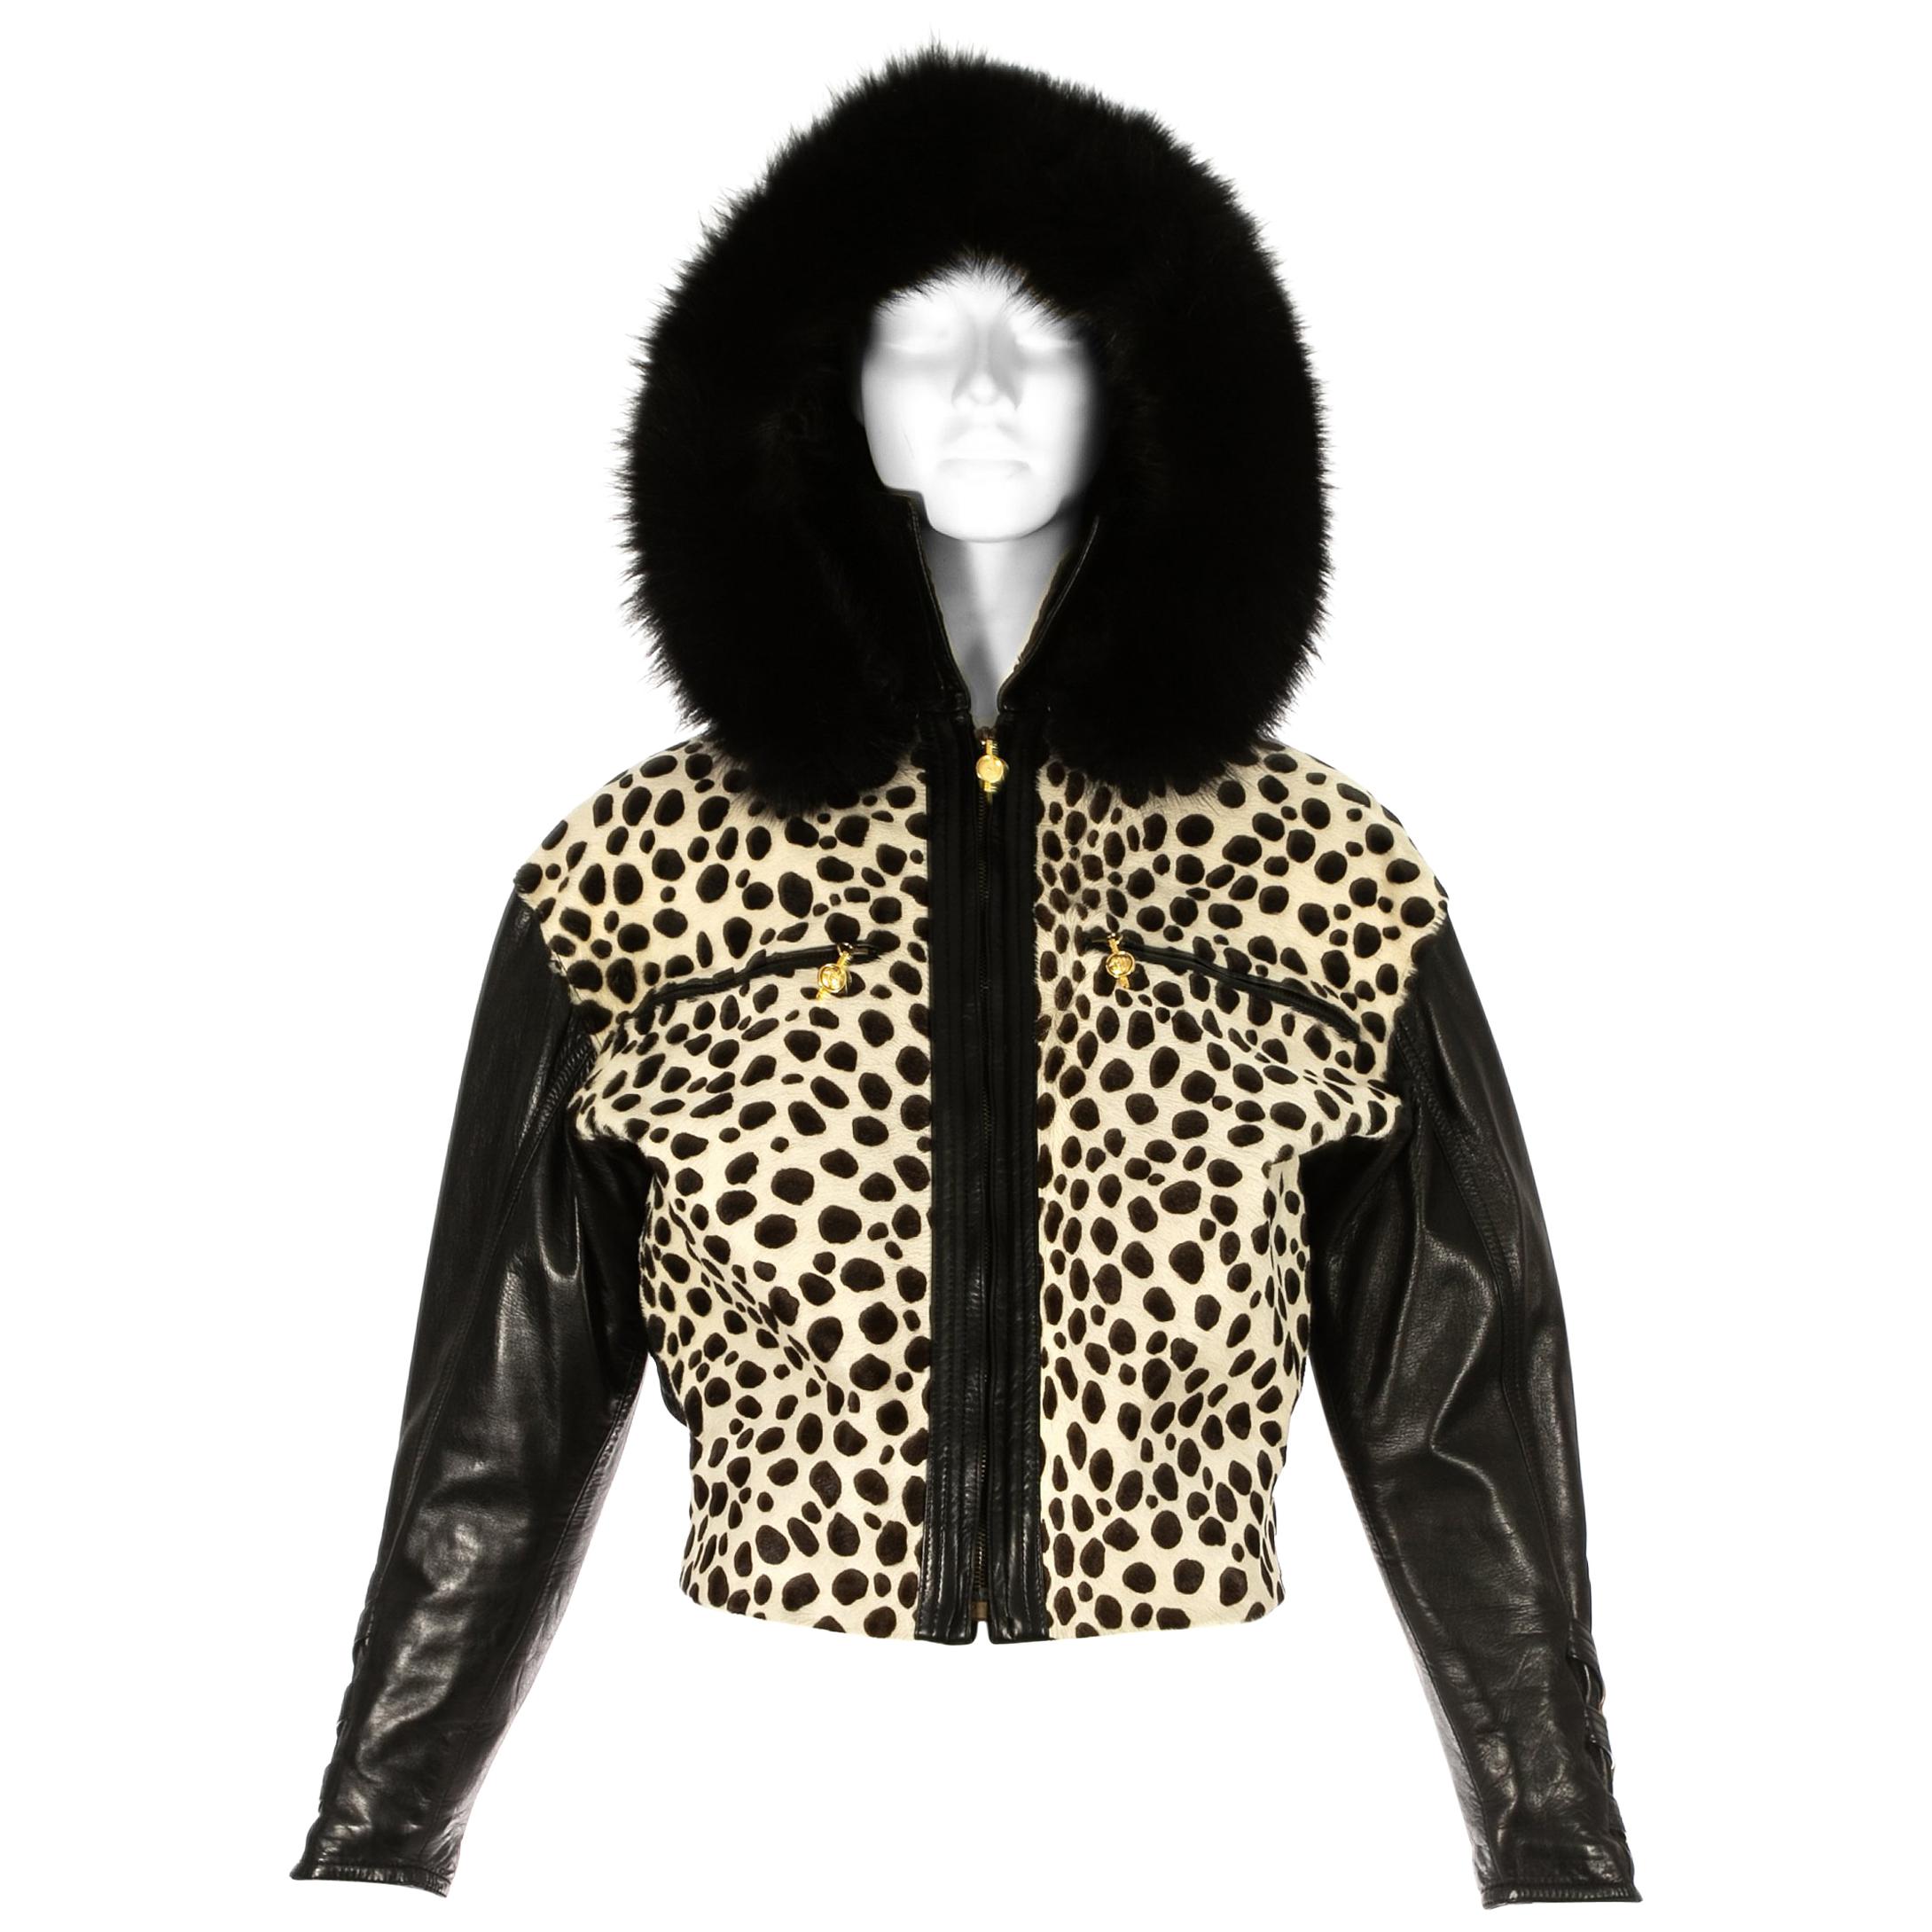 Gianni Versace black leather and pony hair bomber jacket with fur hood, AW 1992